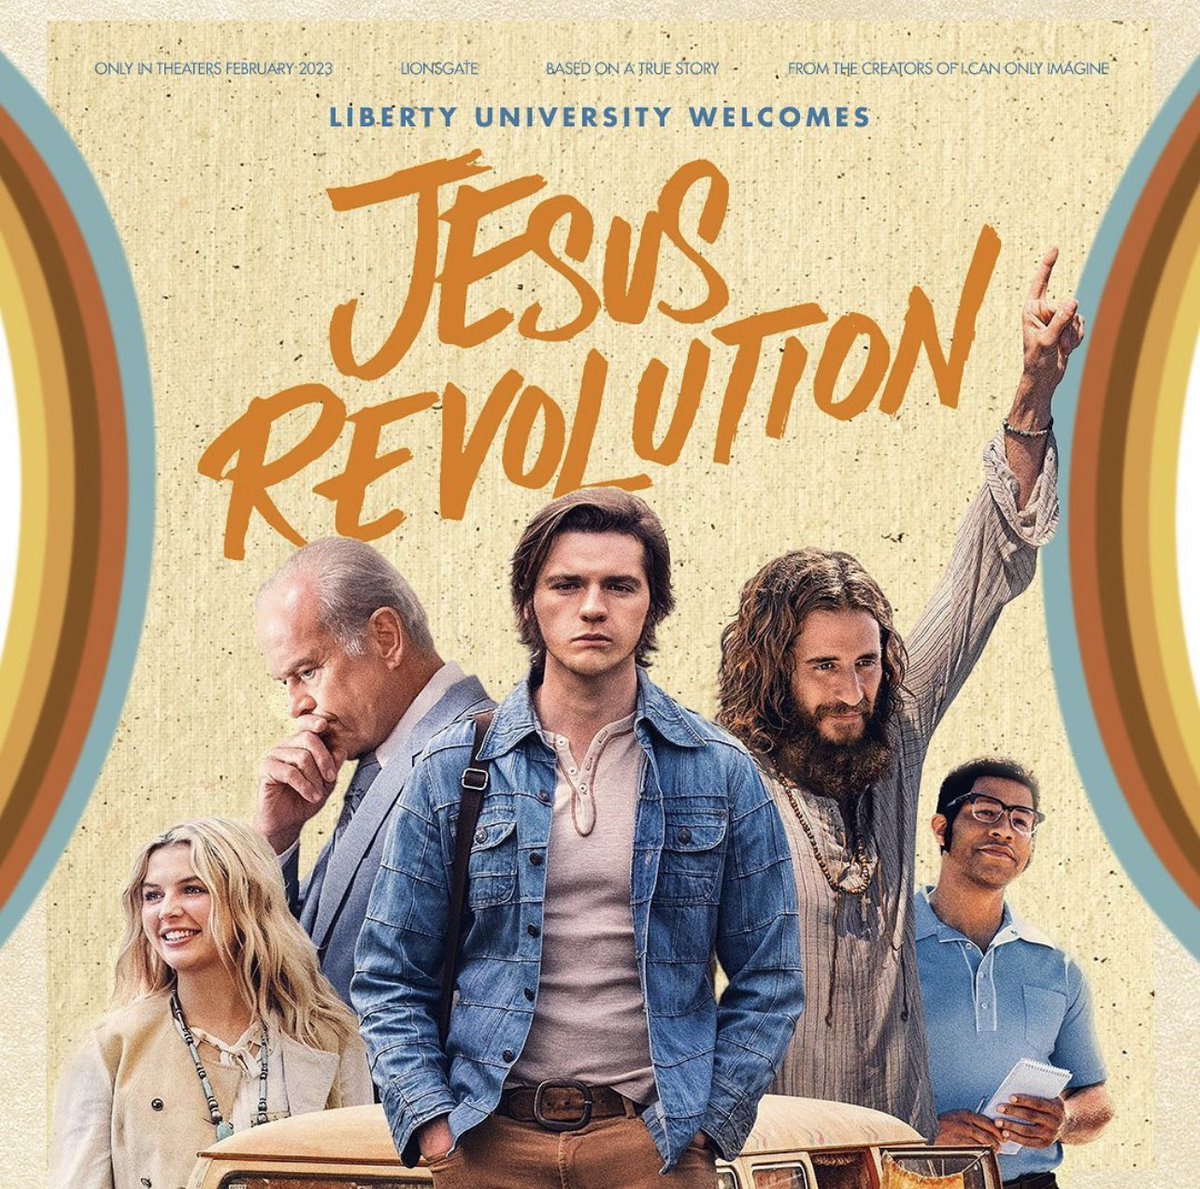 I remember when some Jesus freaks rented a house in my little Ohio town in the early 70s. Quite a phenomenon. That’s what made watching #JesusRevolution so much fun - I never really knew the backstory of how that whole thing started. It opened yesterday and it’s a lovely movie!